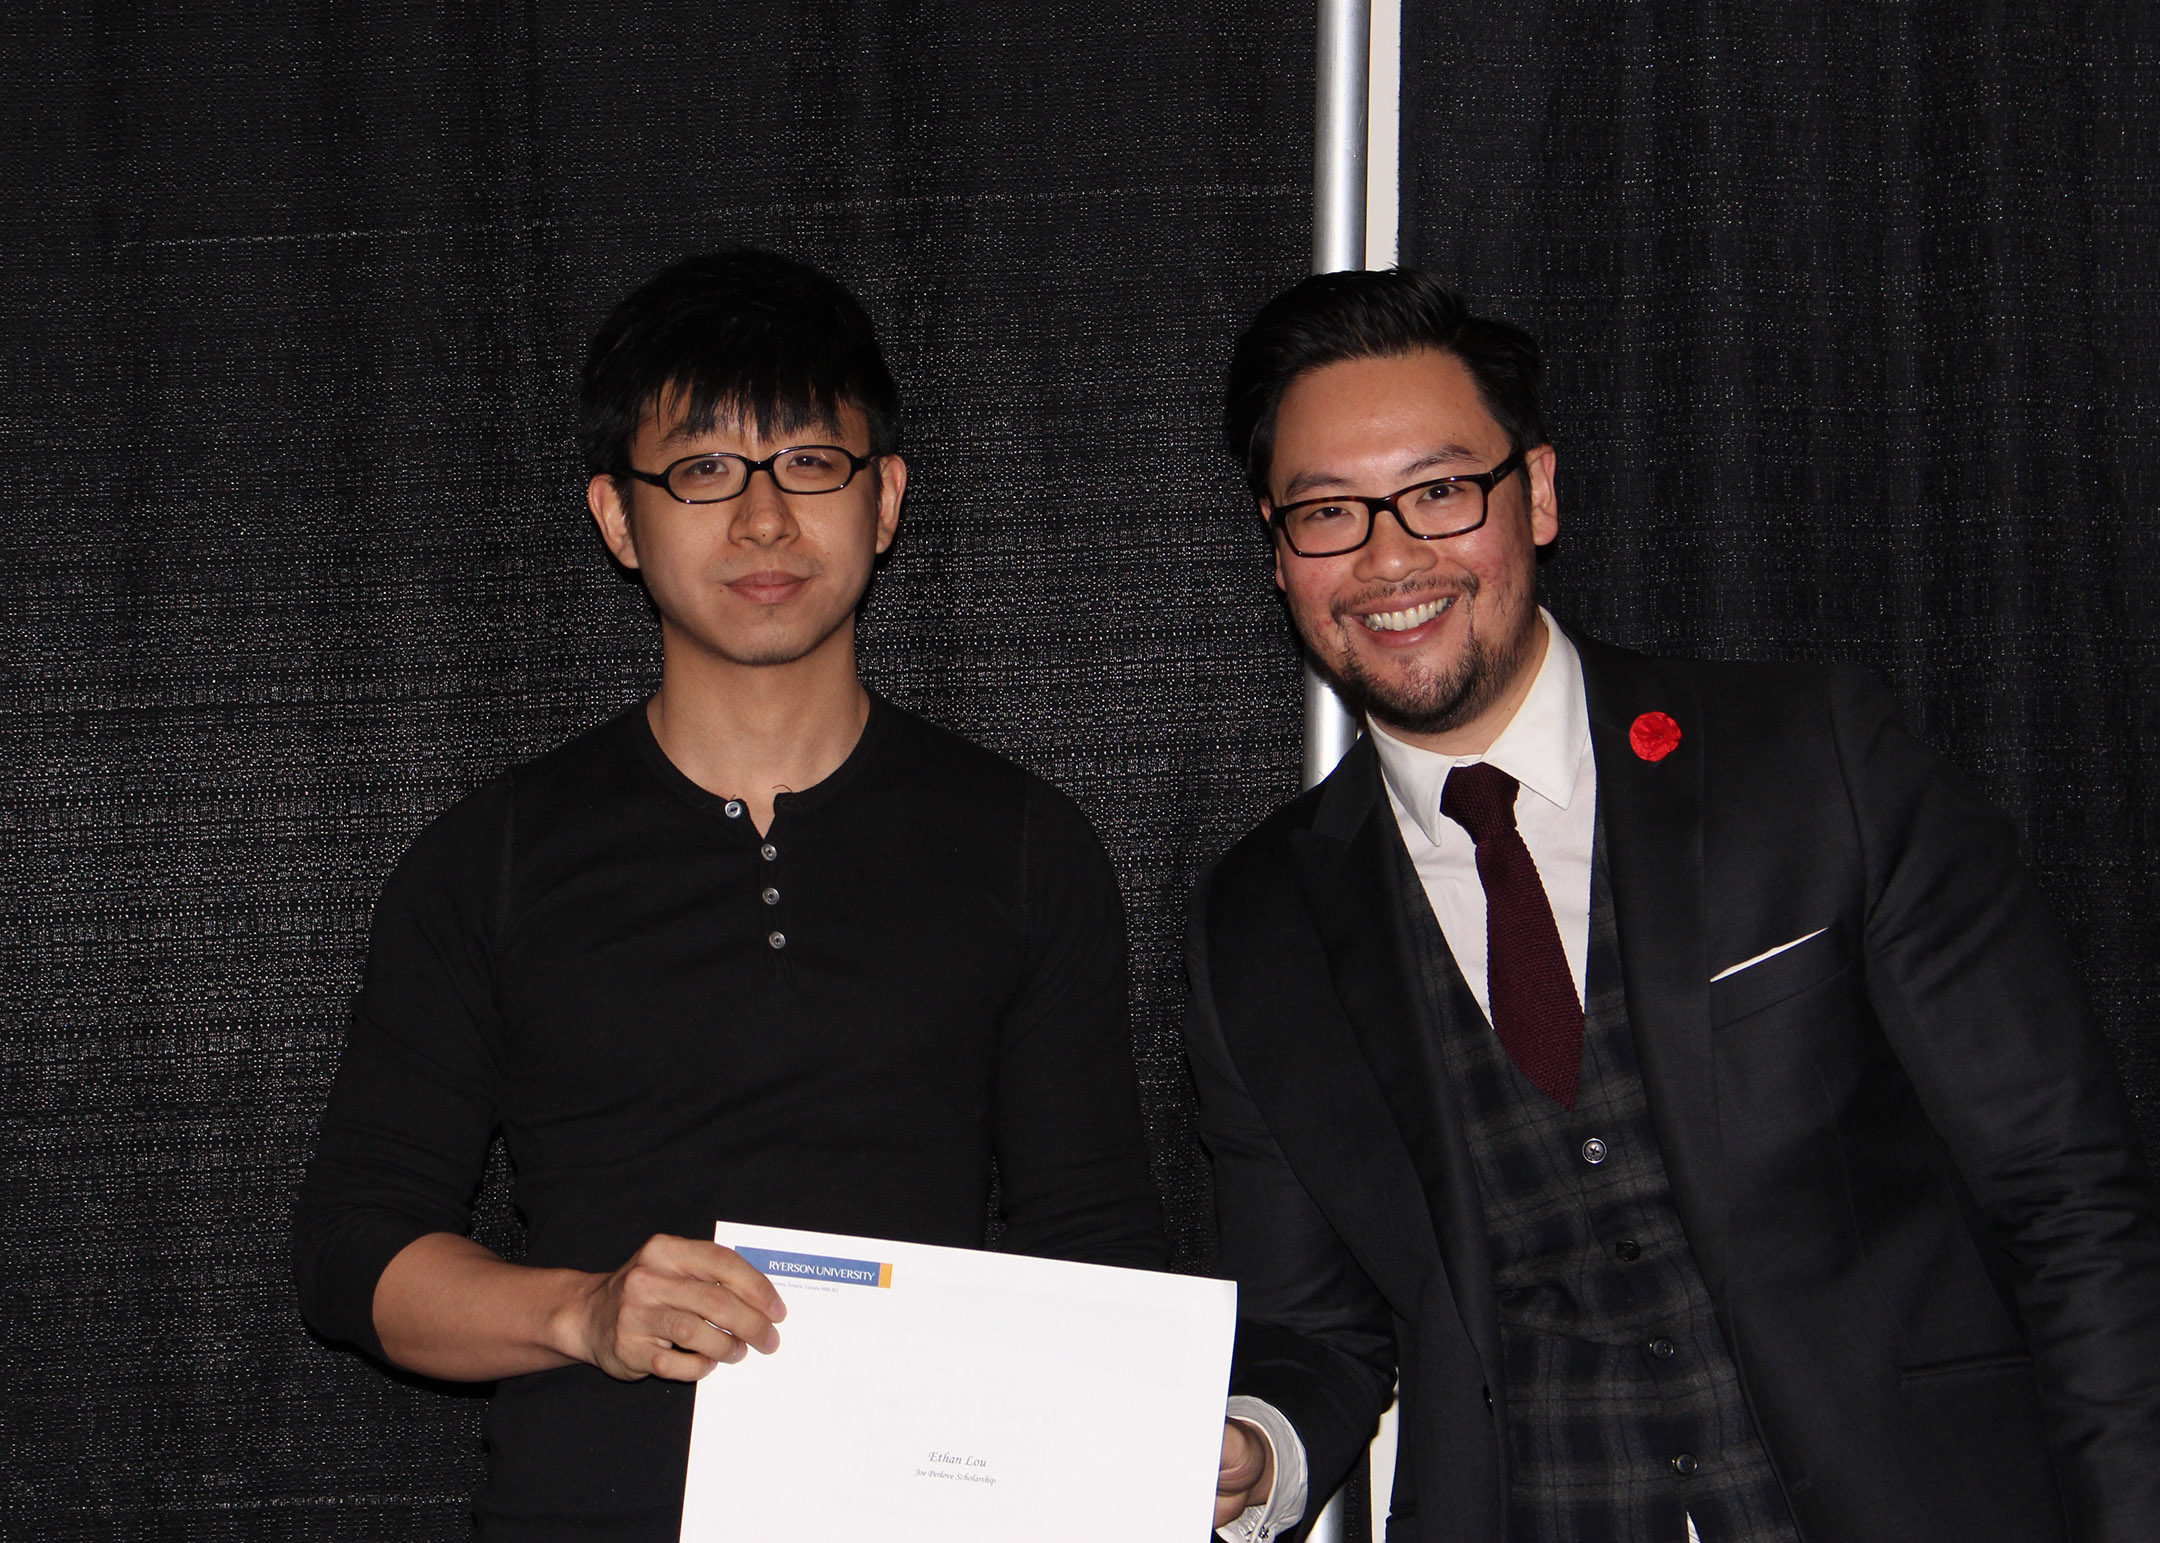 2015 winner Ethan Lou with Awards committee member Adrian Ma.